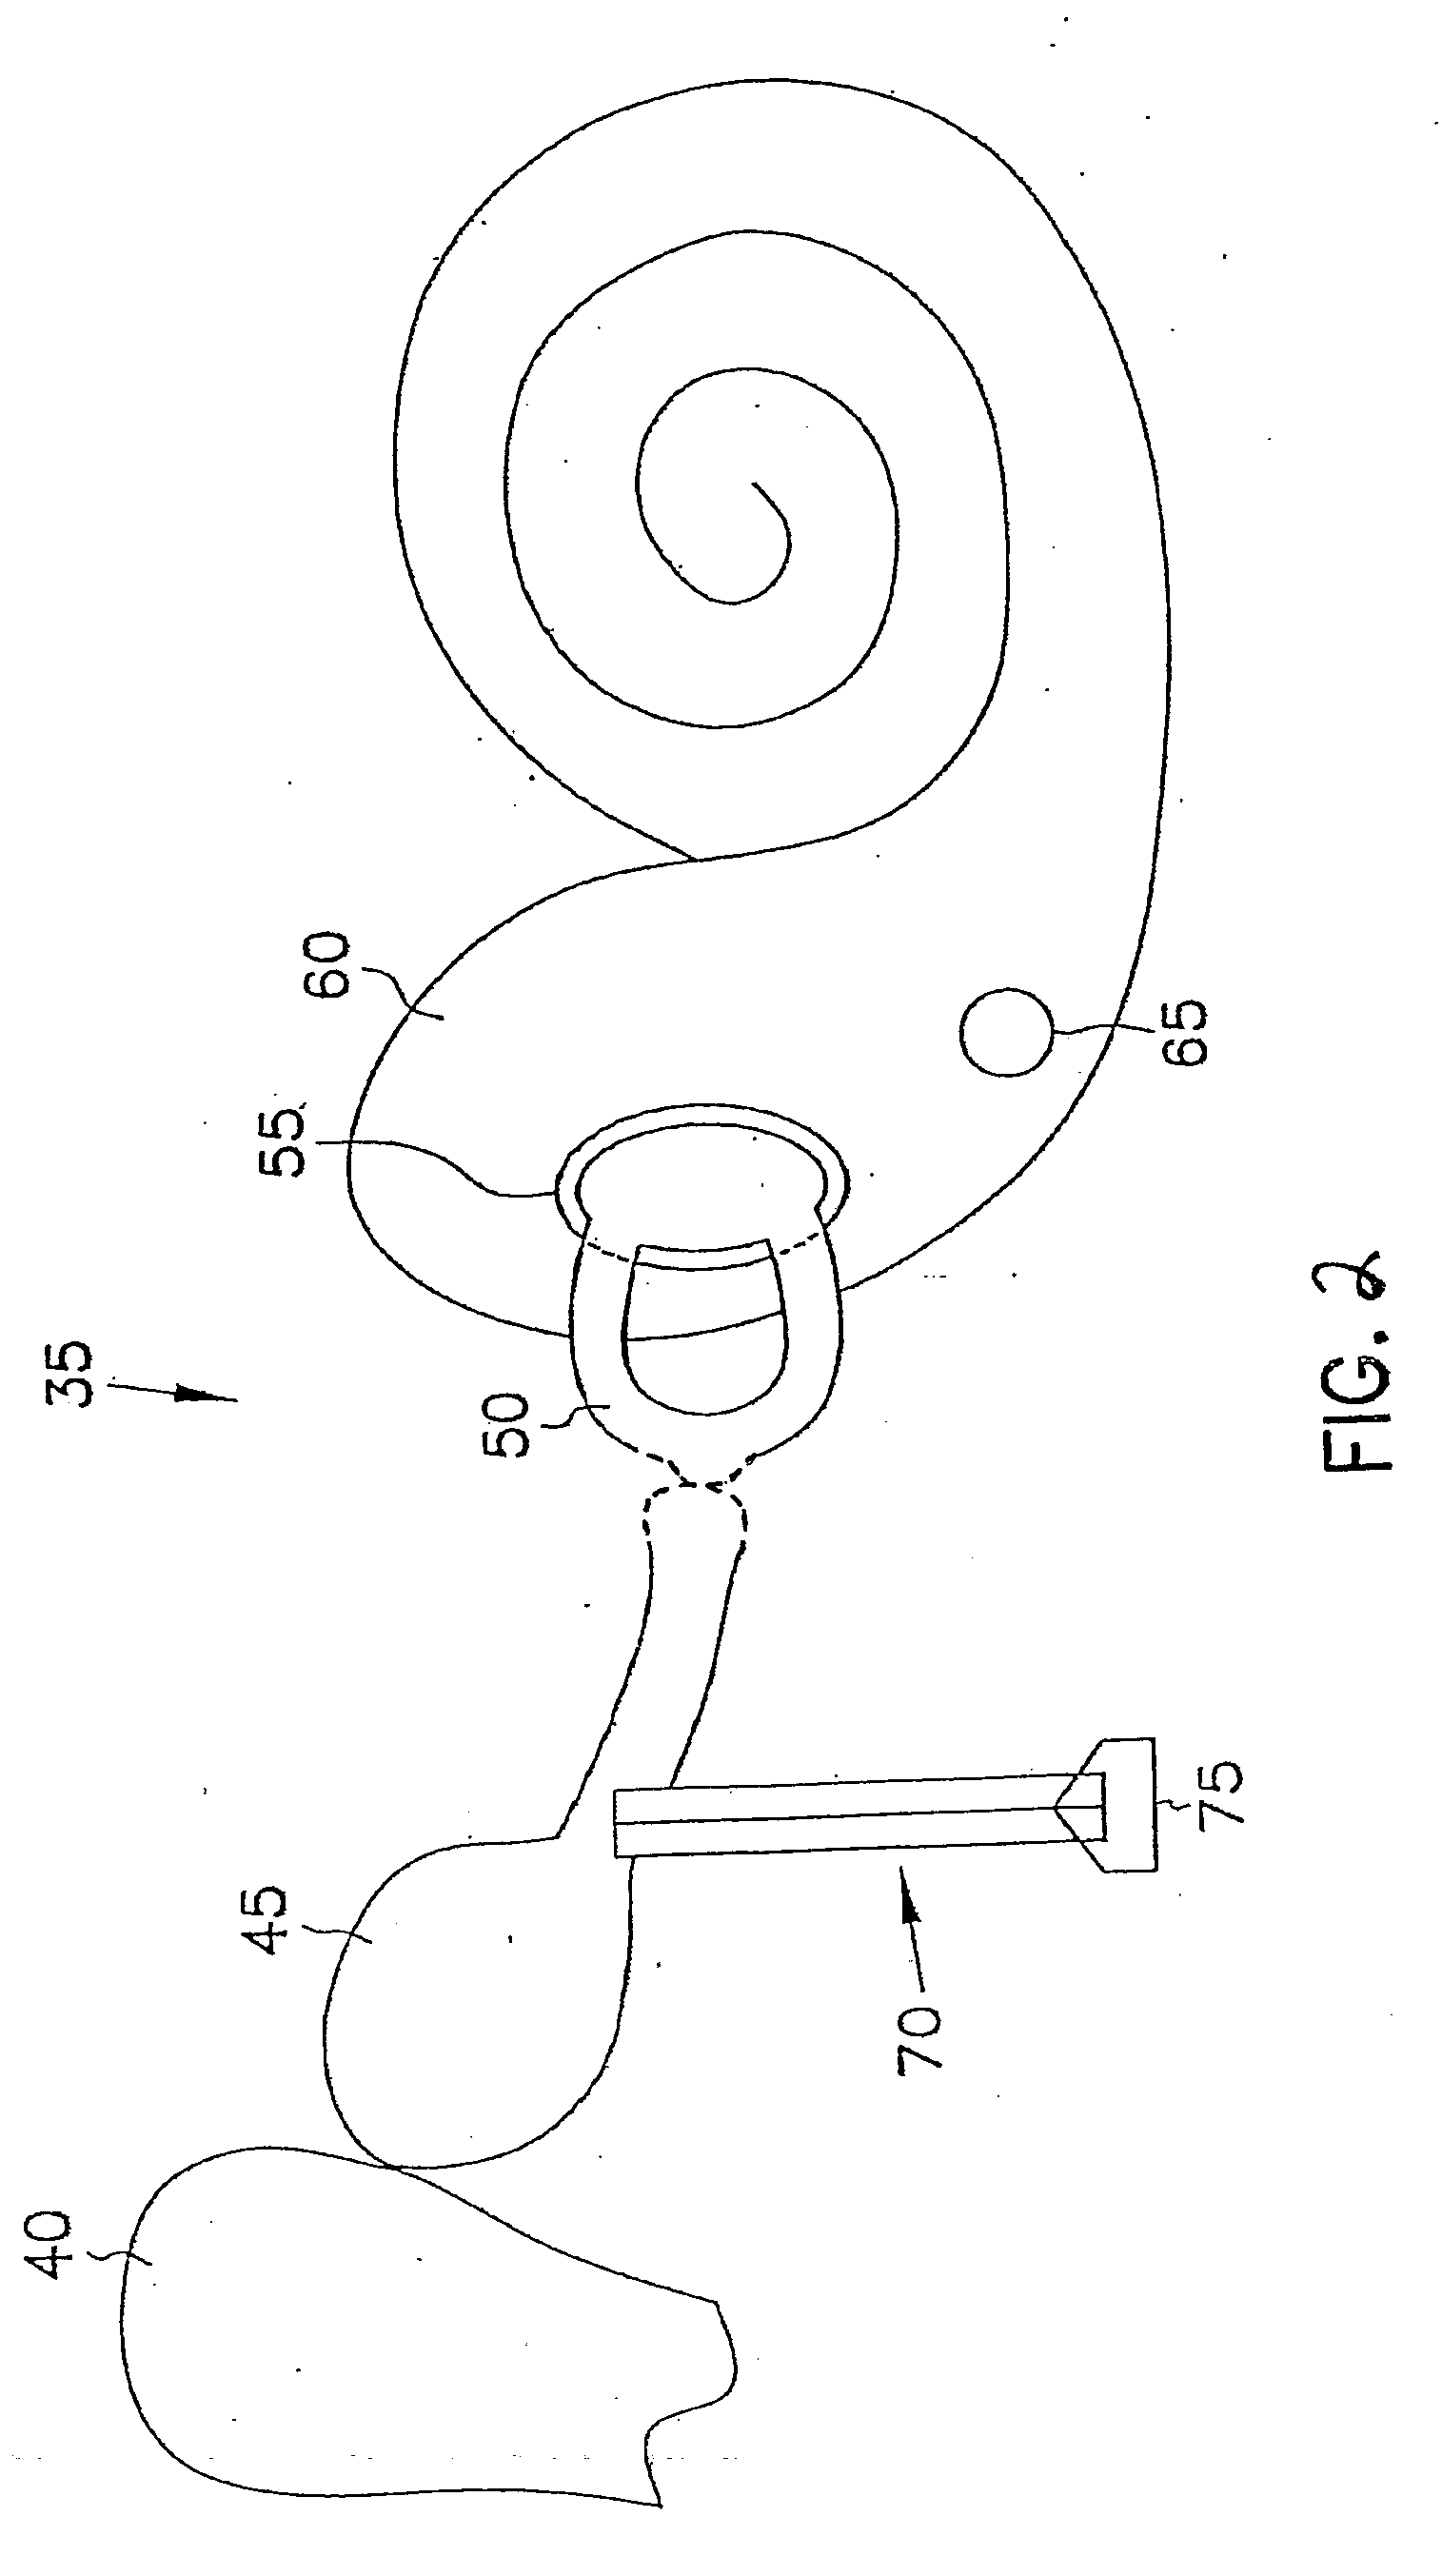 Method and apparatus for vibrational damping of implantable hearing aid components